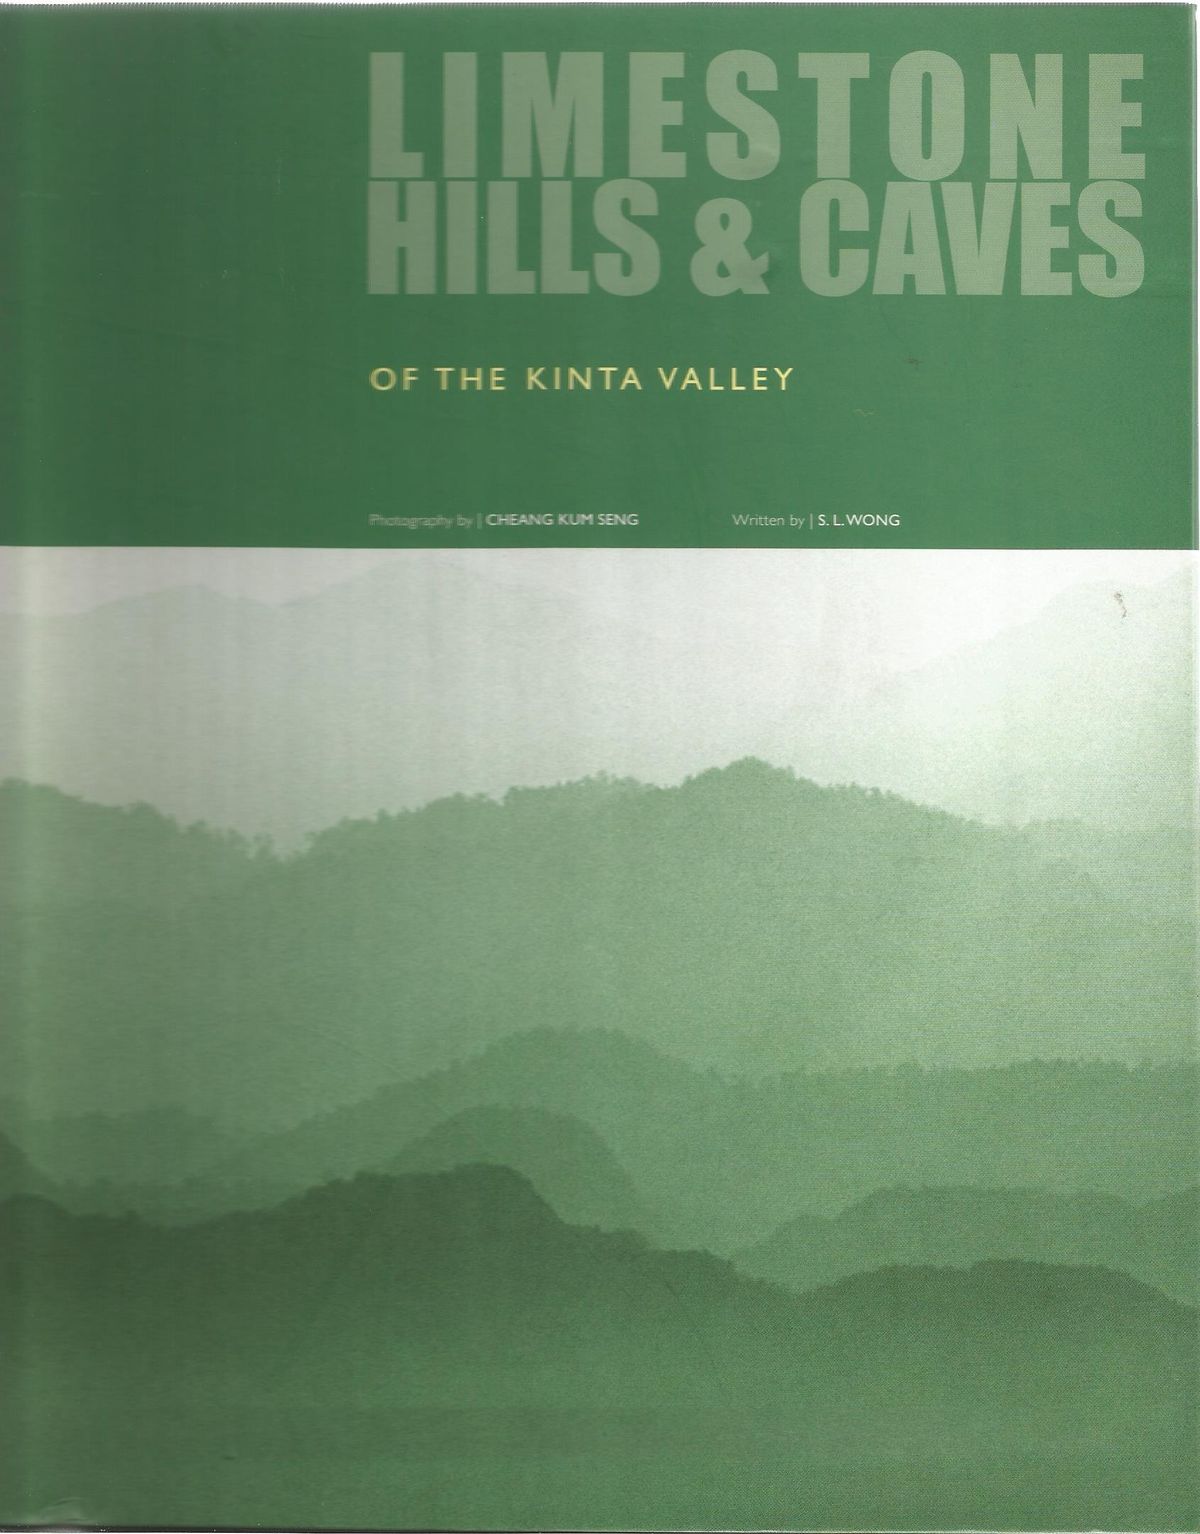 Limestone Hills & Caves of the Kinta Valley